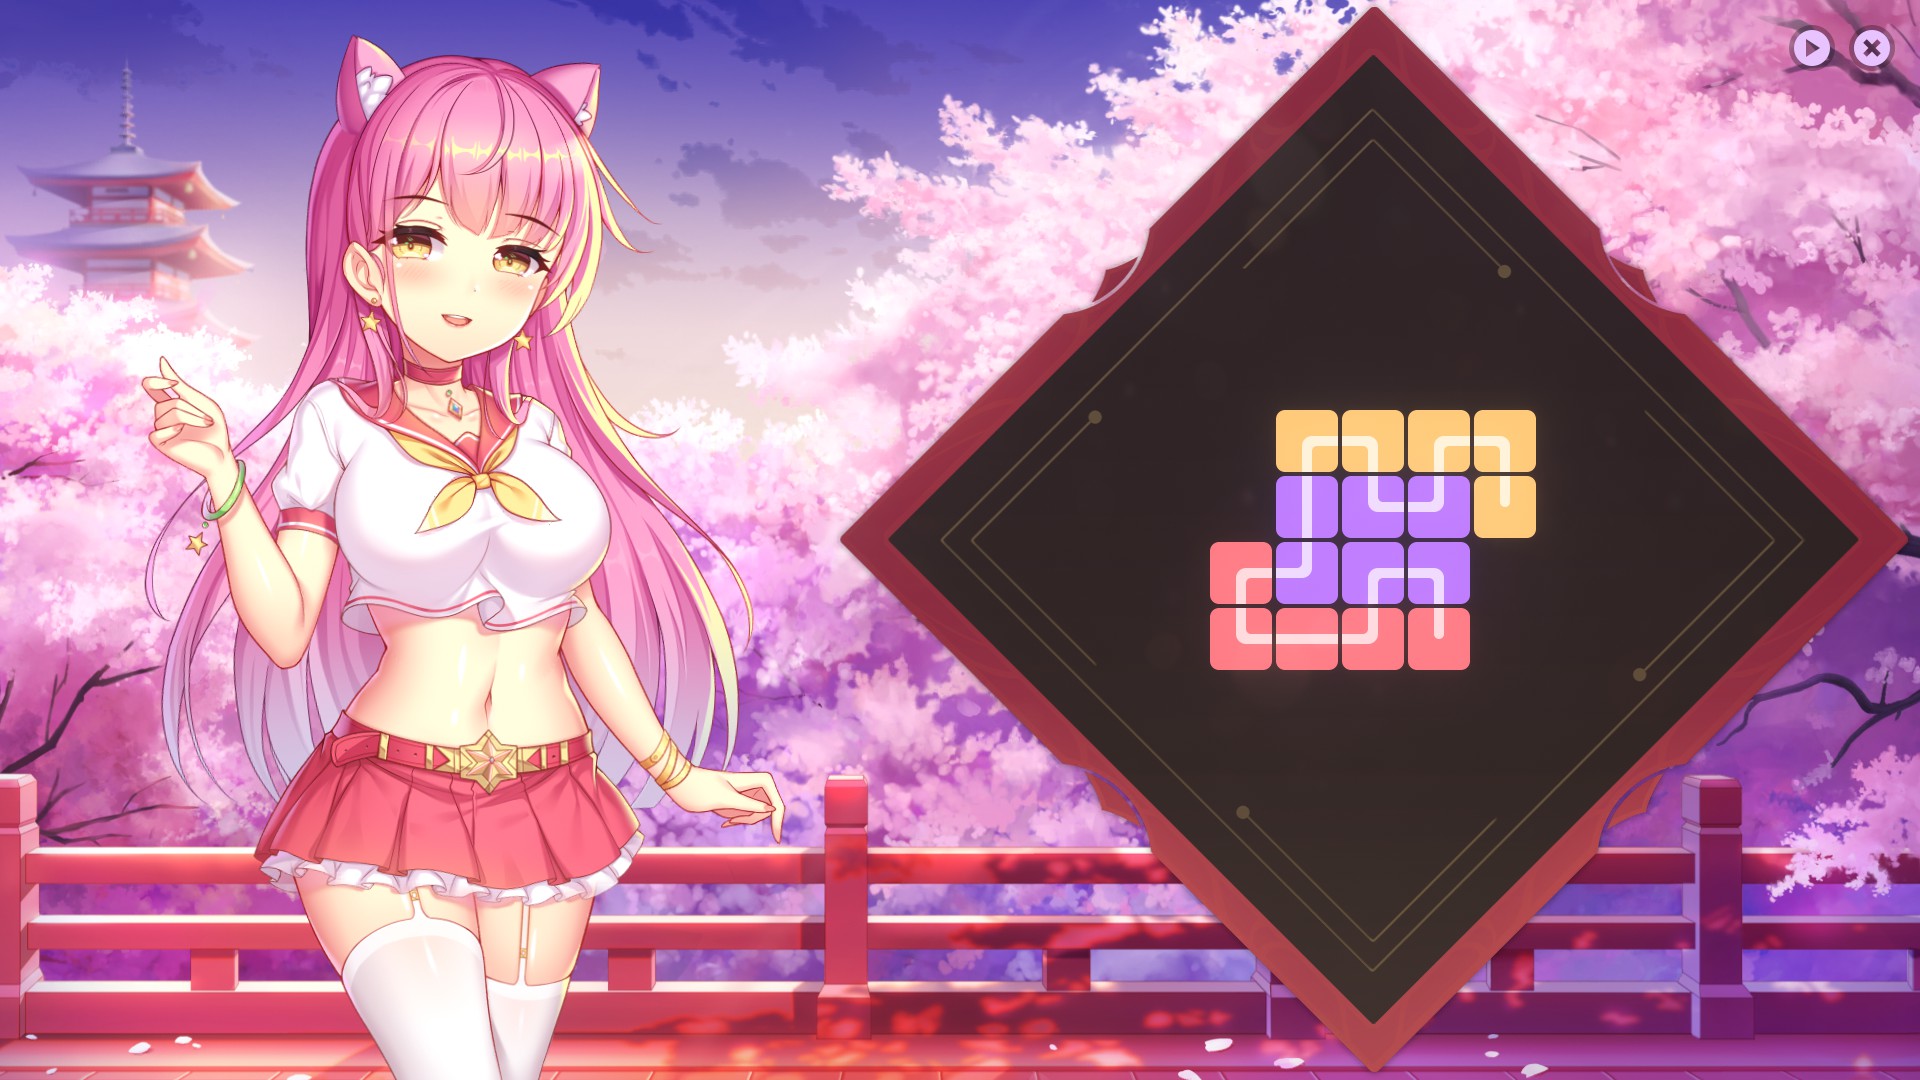 Sakura Hime 2 Achievement Guide - Images of completed levels - 4E9CEBC